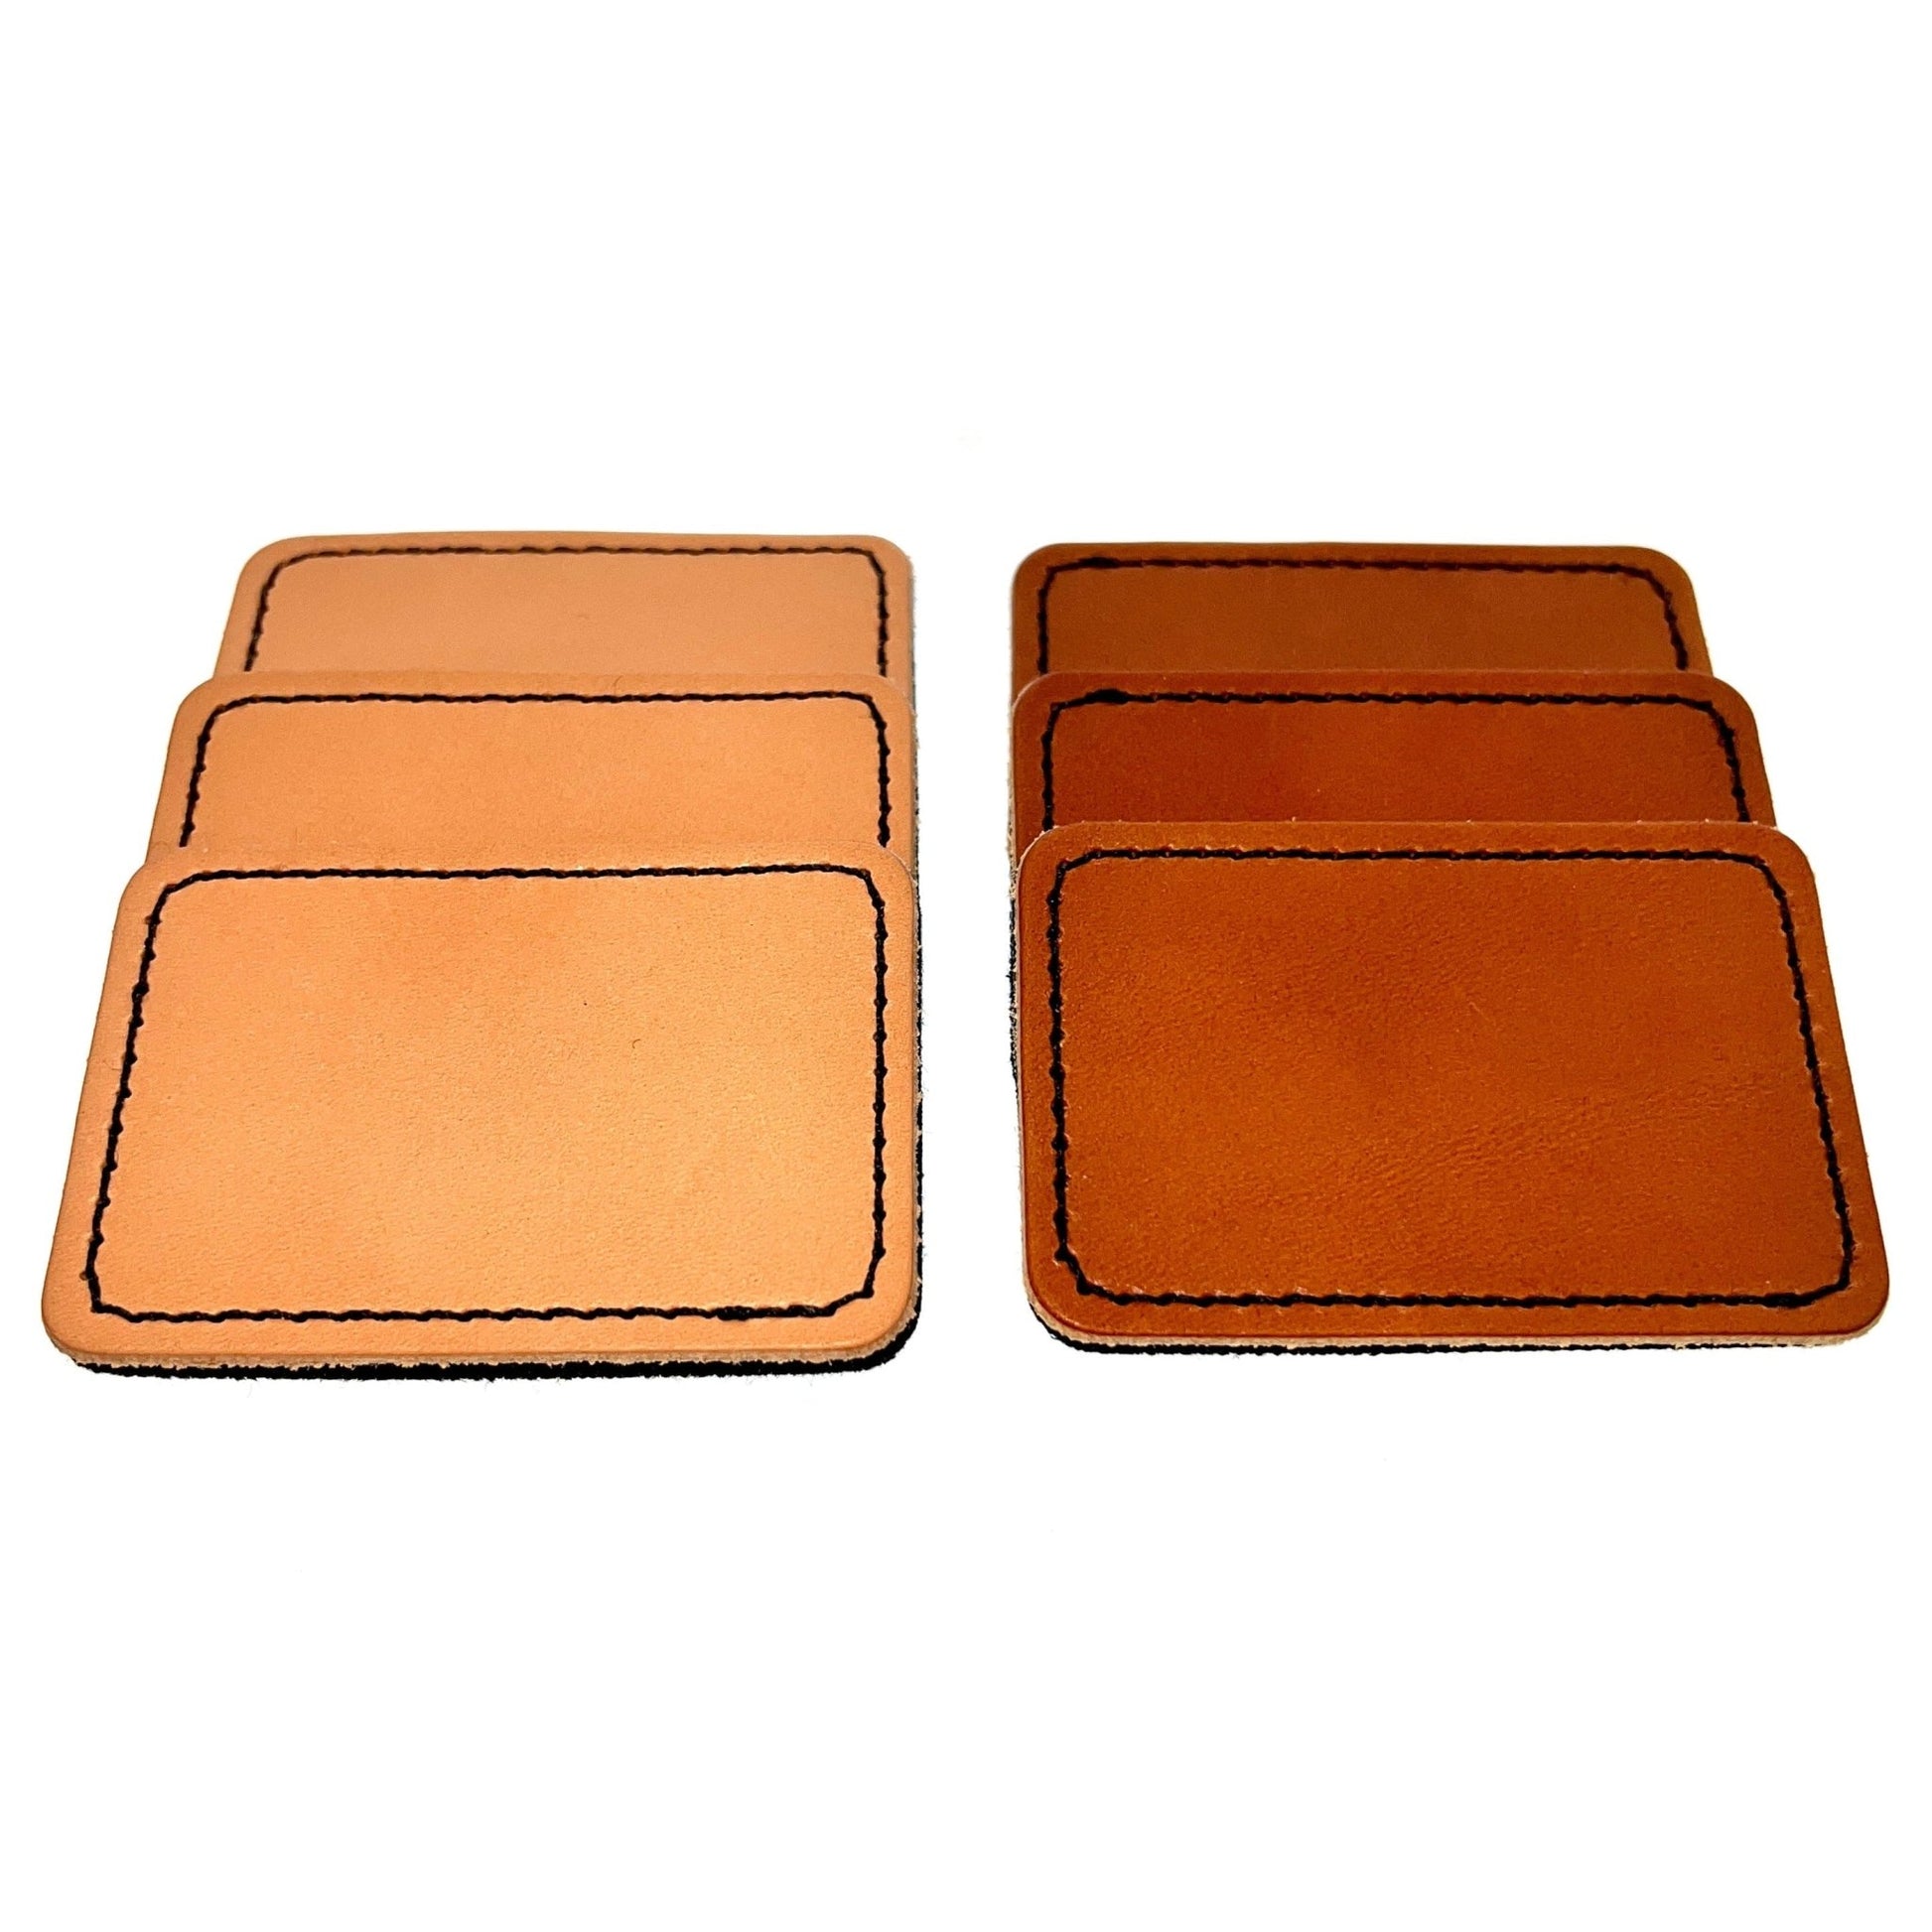 Jersey Tan Stitched Leather Hook & Loop Patches - #LoneStar Adhesive#